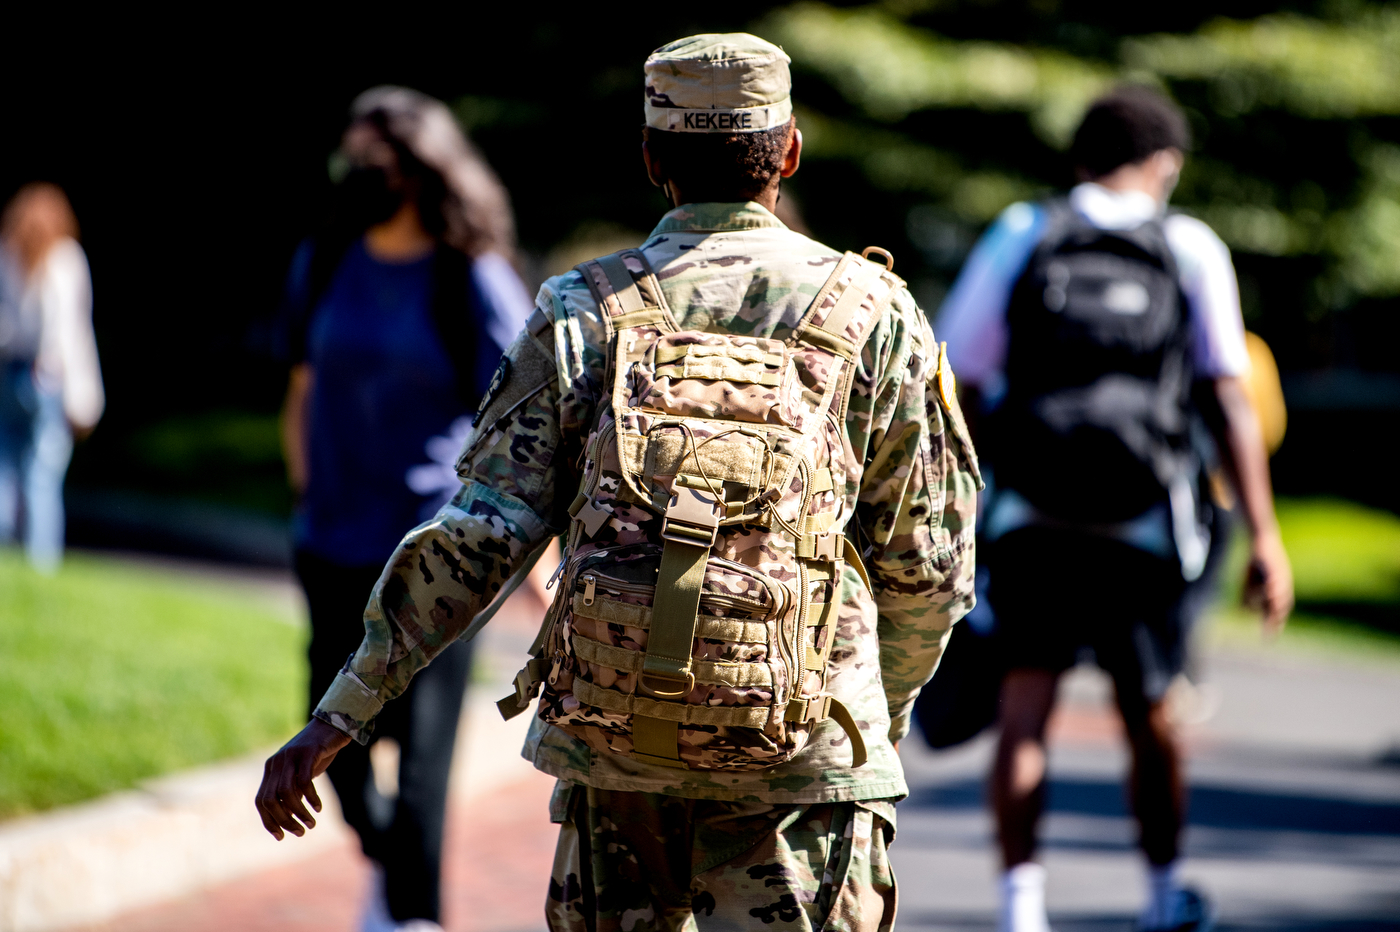 north east rotc student walking through campus